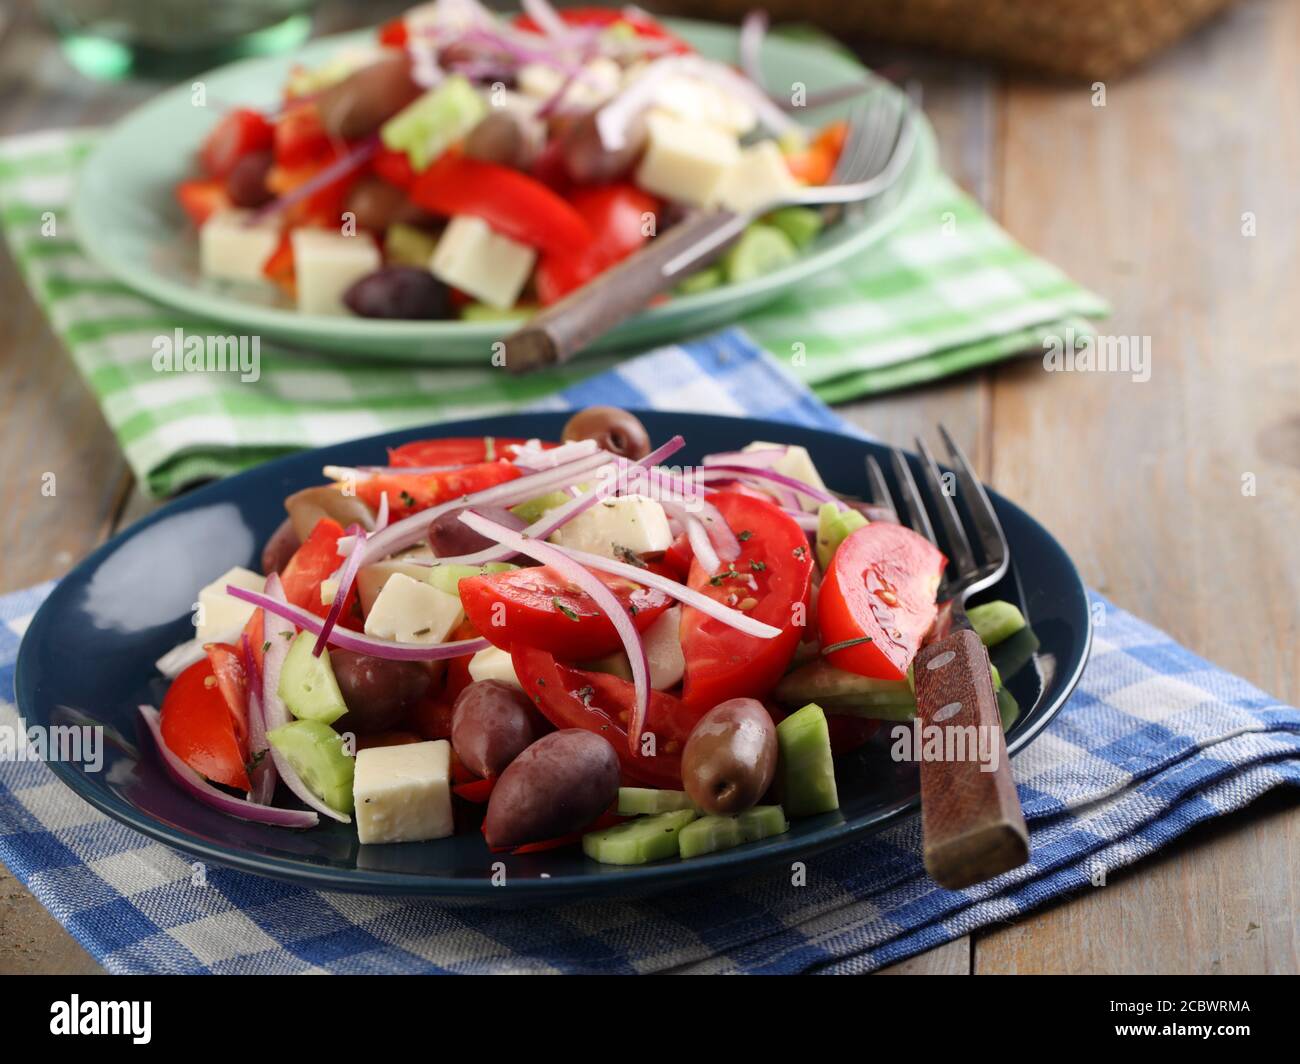 Two portions of Greek salad on a rustic table Stock Photo